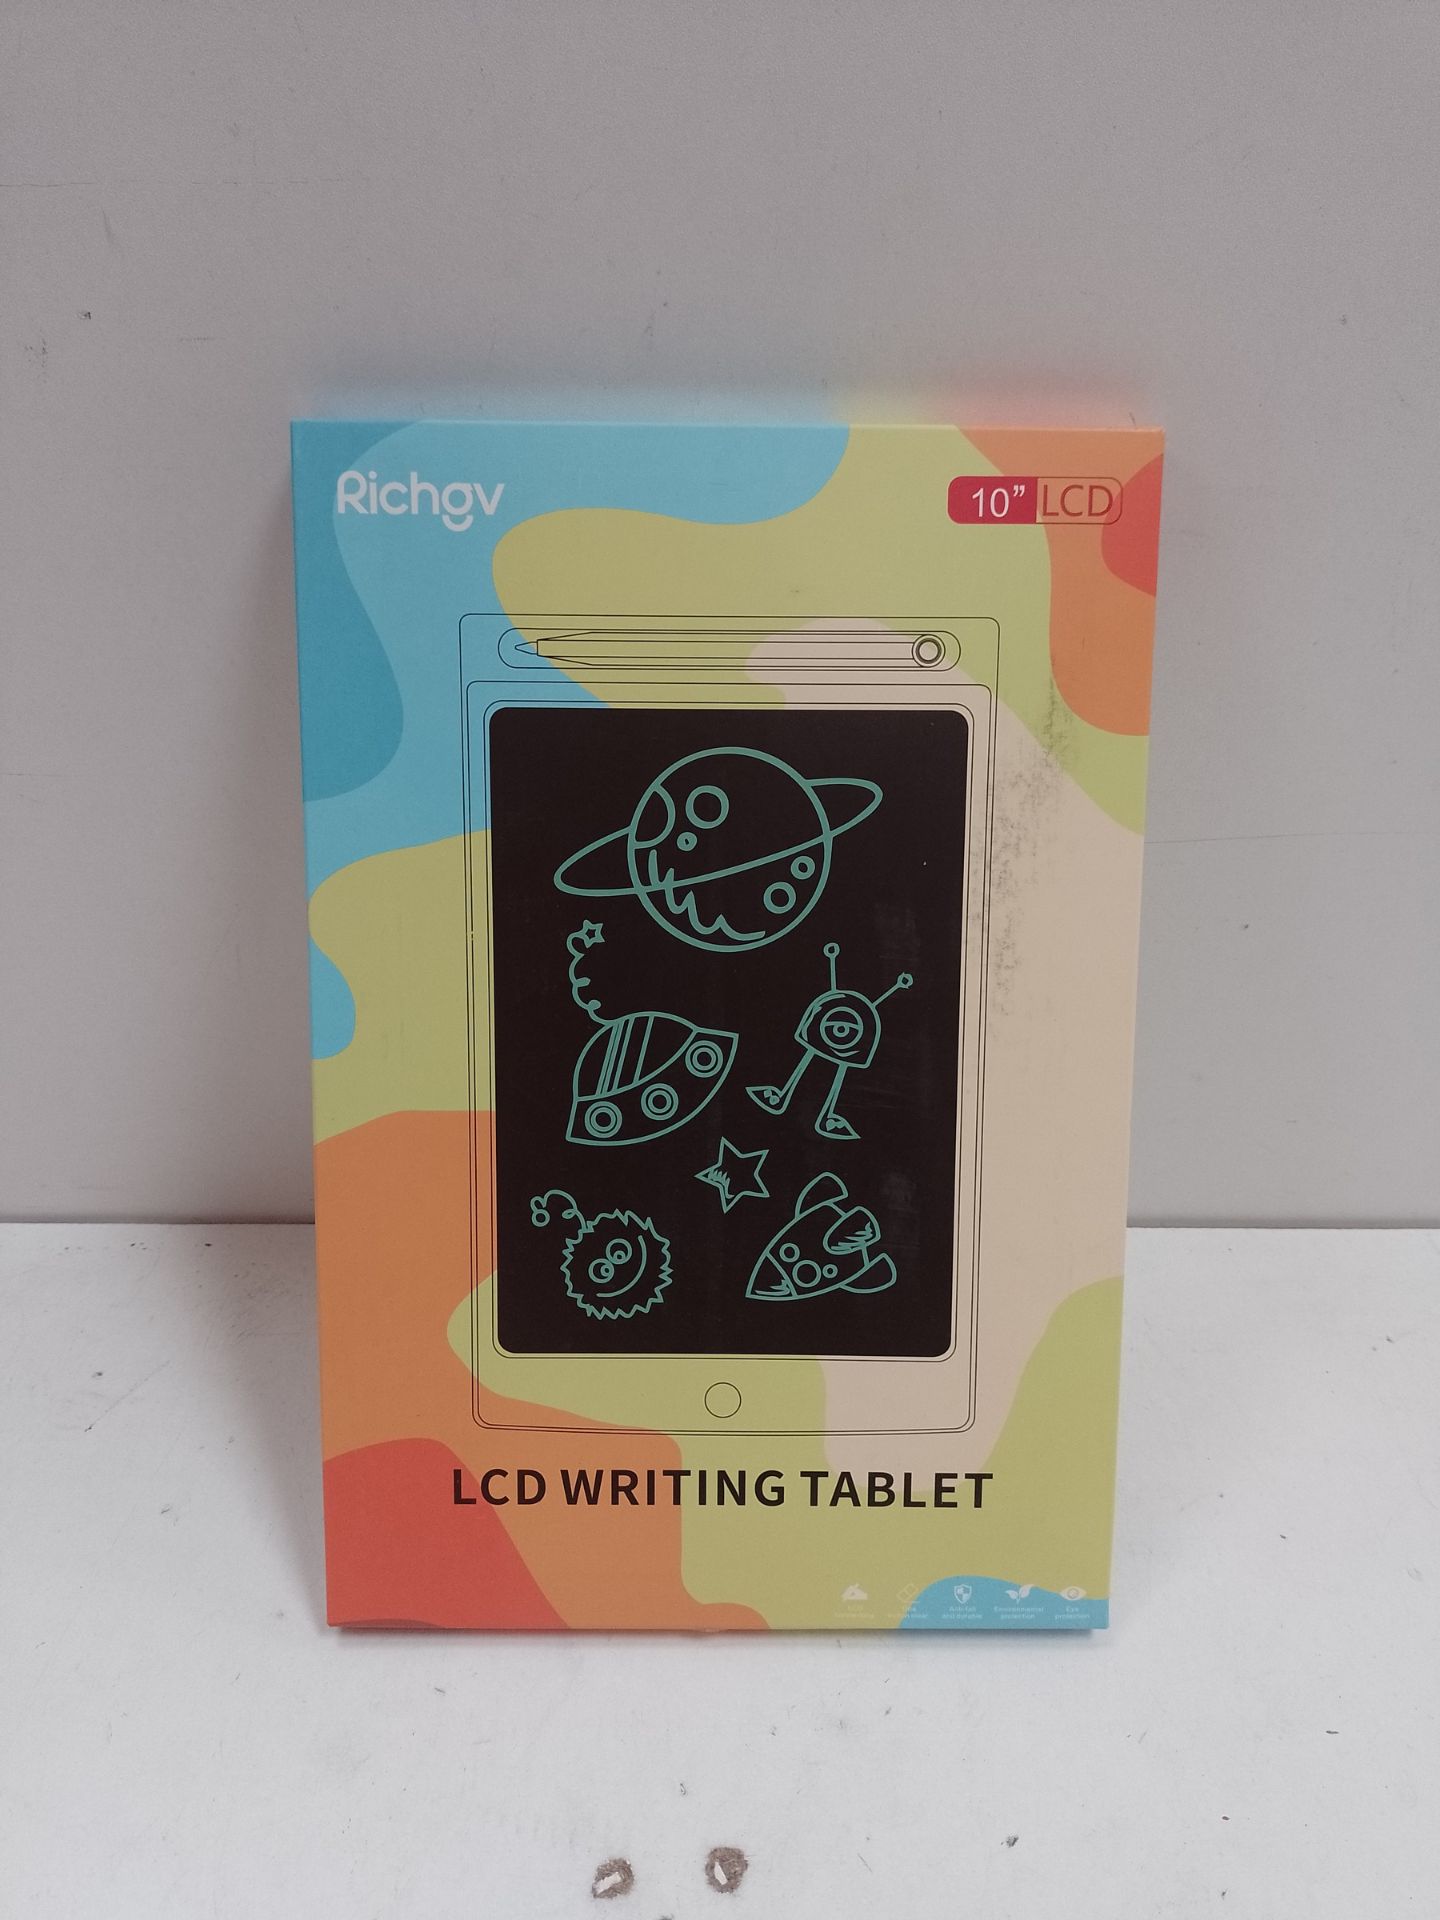 RRP £13.23 Richgv LCD Writing Tablet for Kids - Image 2 of 2